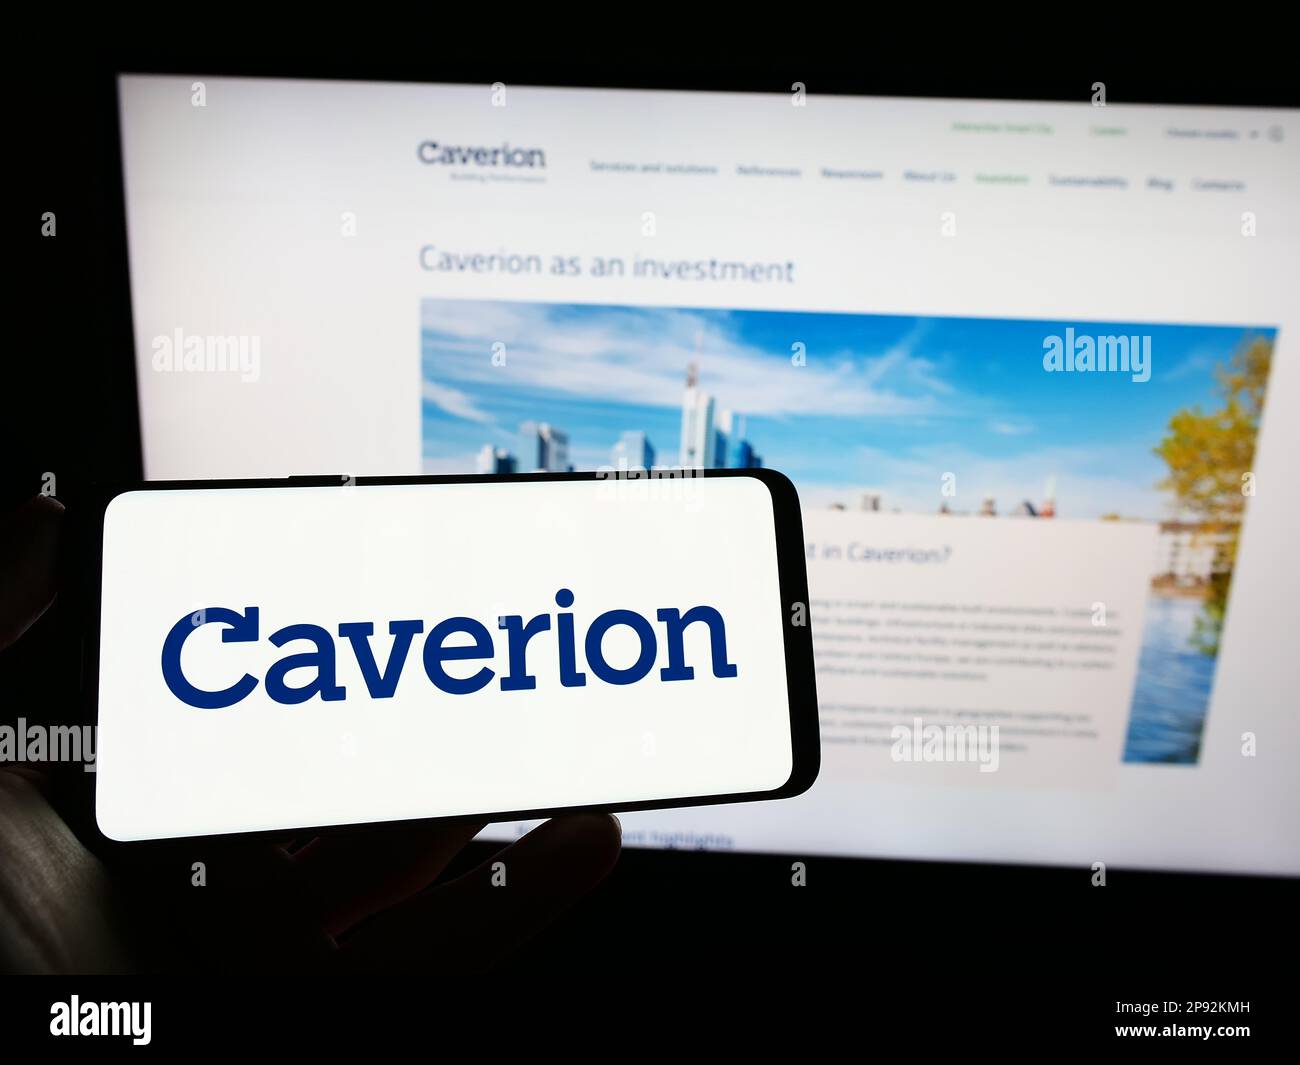 Person holding mobile phone with logo of building technology company Caverion Oyj on screen in front of business web page. Focus on phone display. Stock Photo